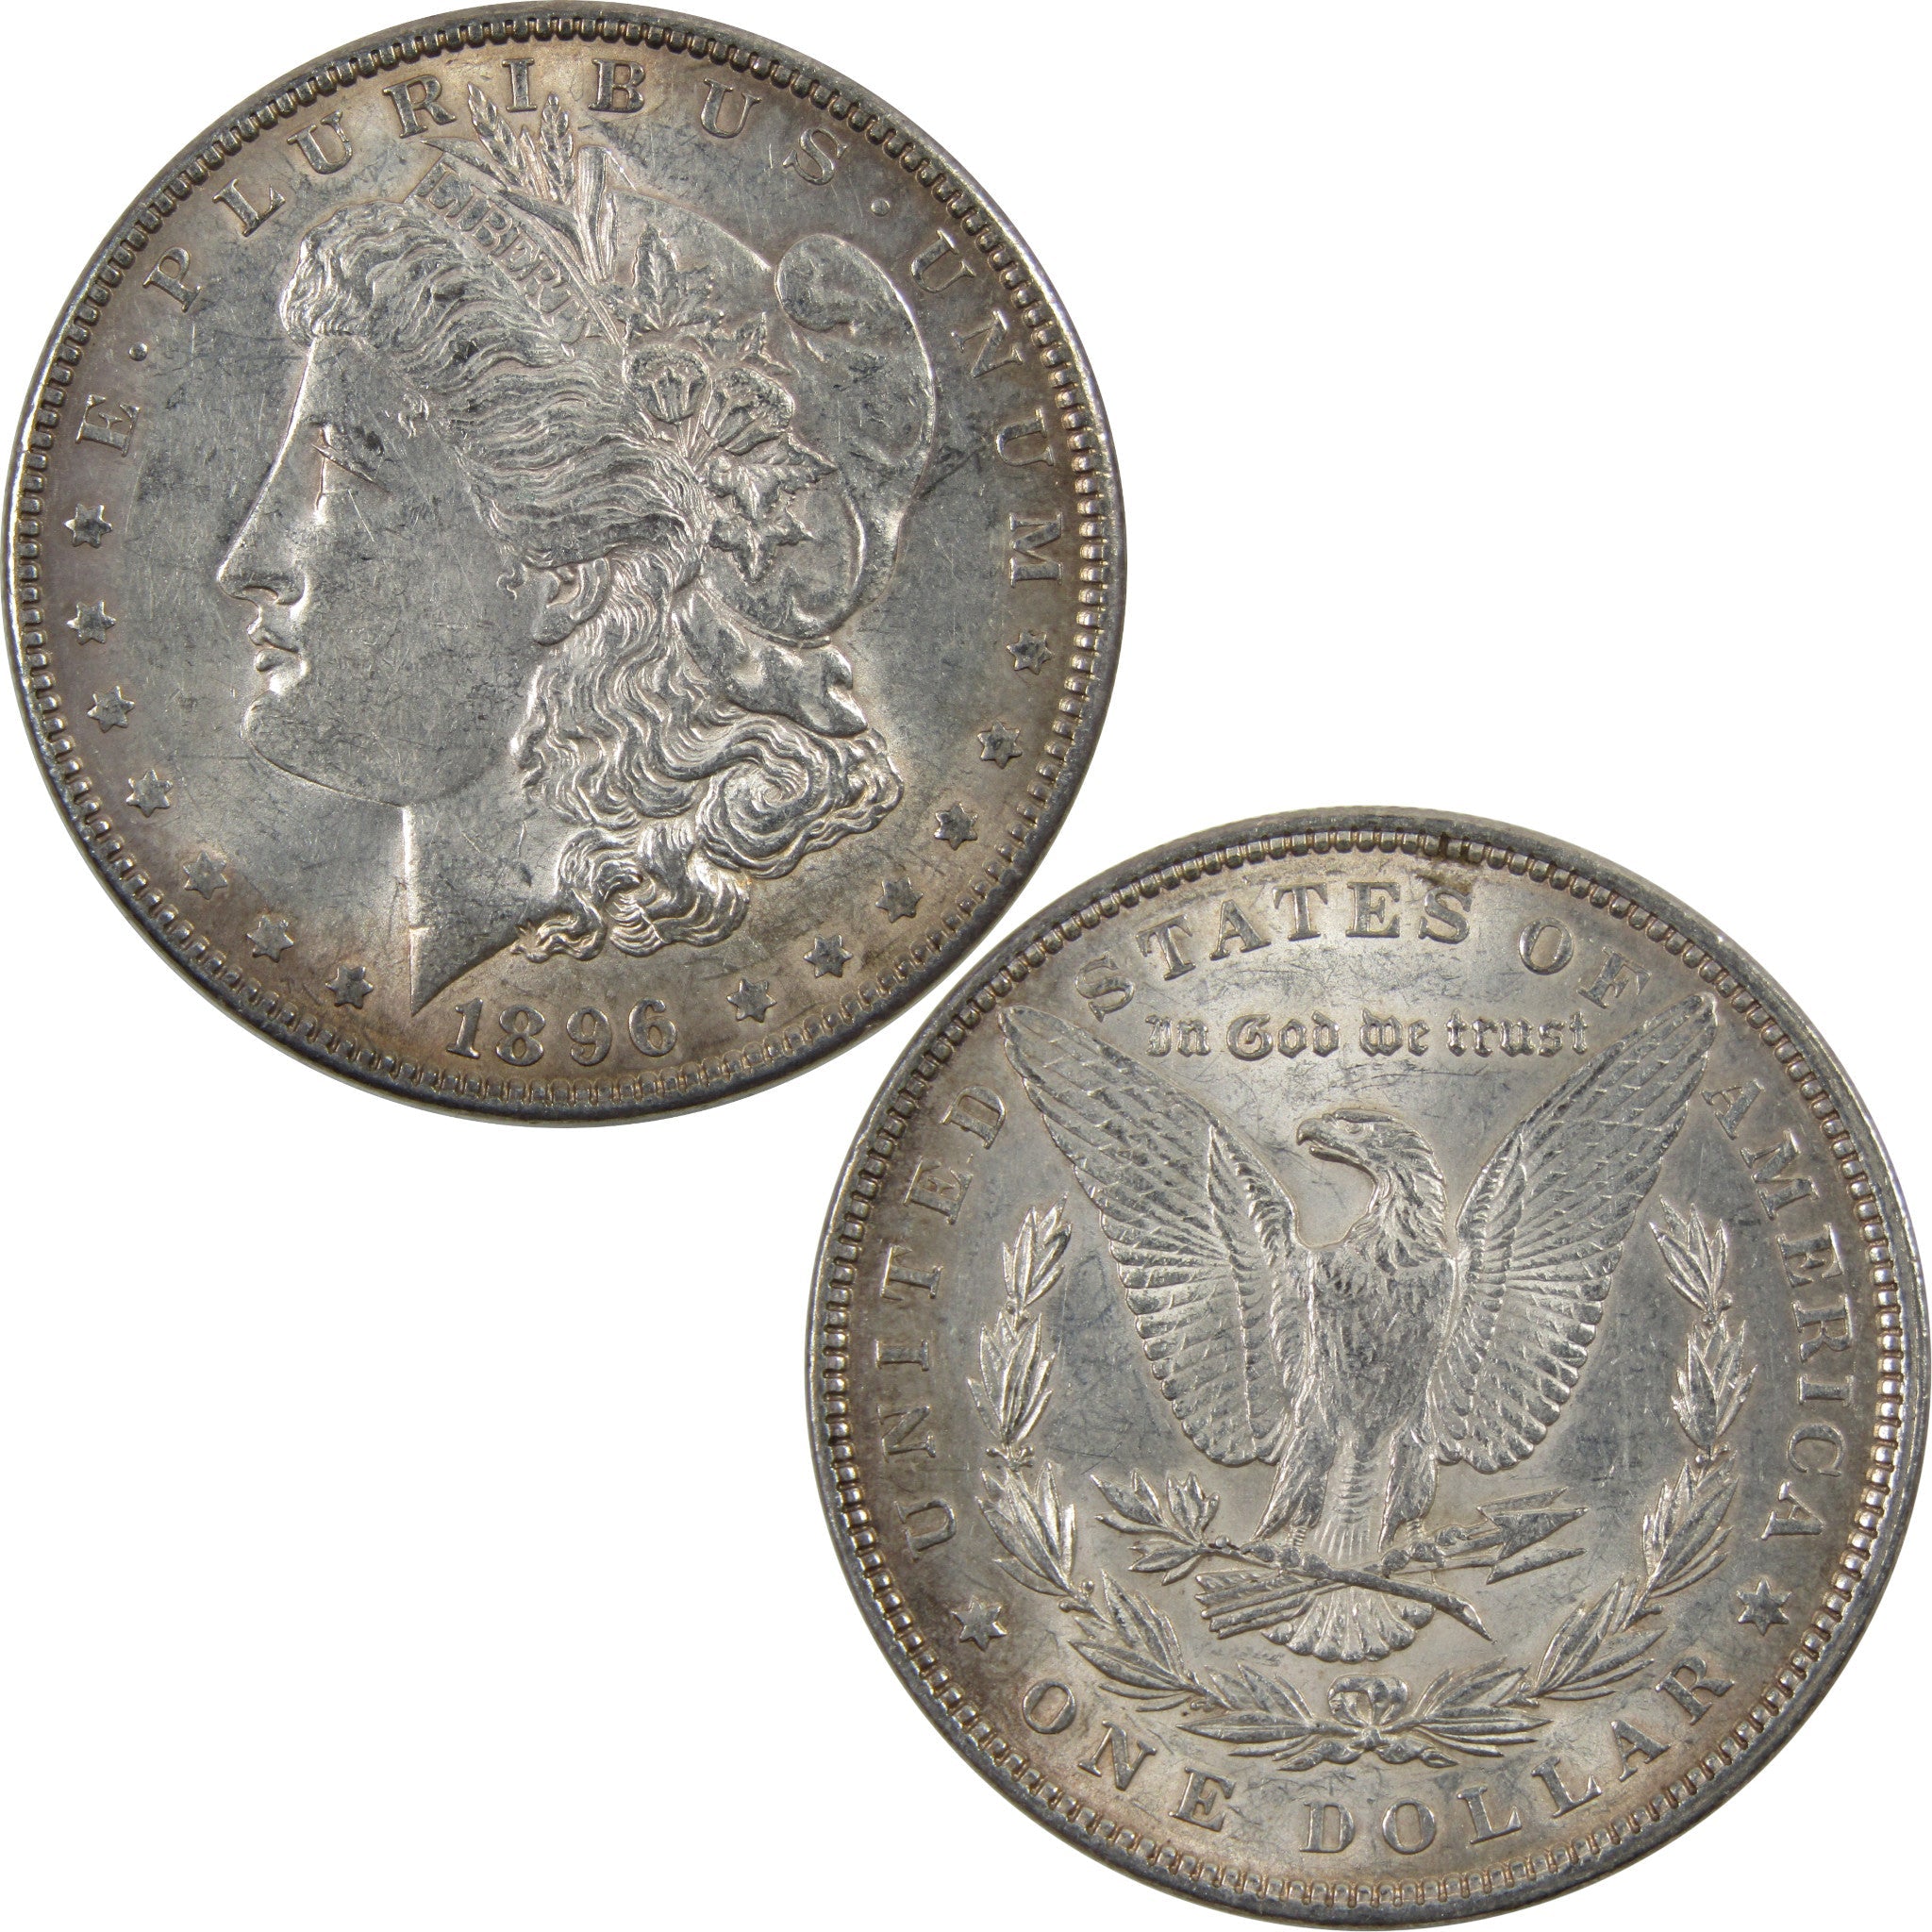 1896 Morgan Dollar AU About Uncirculated 90% Silver $1 Coin SKU:I5459 - Morgan coin - Morgan silver dollar - Morgan silver dollar for sale - Profile Coins &amp; Collectibles